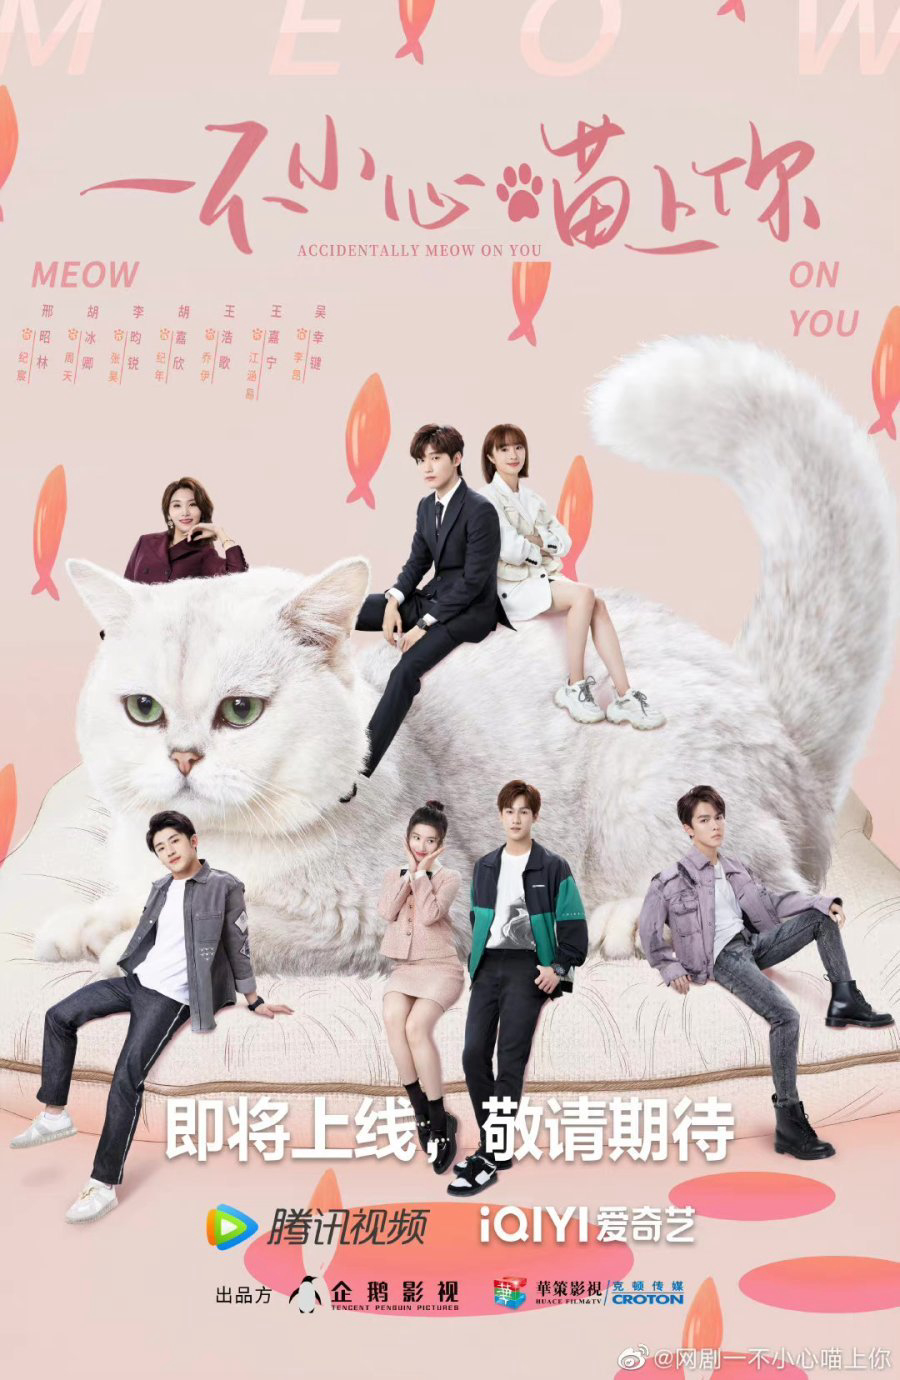 Poster Phim Bất Cẩn Meow Phải Anh (Accidentally Meow On You)